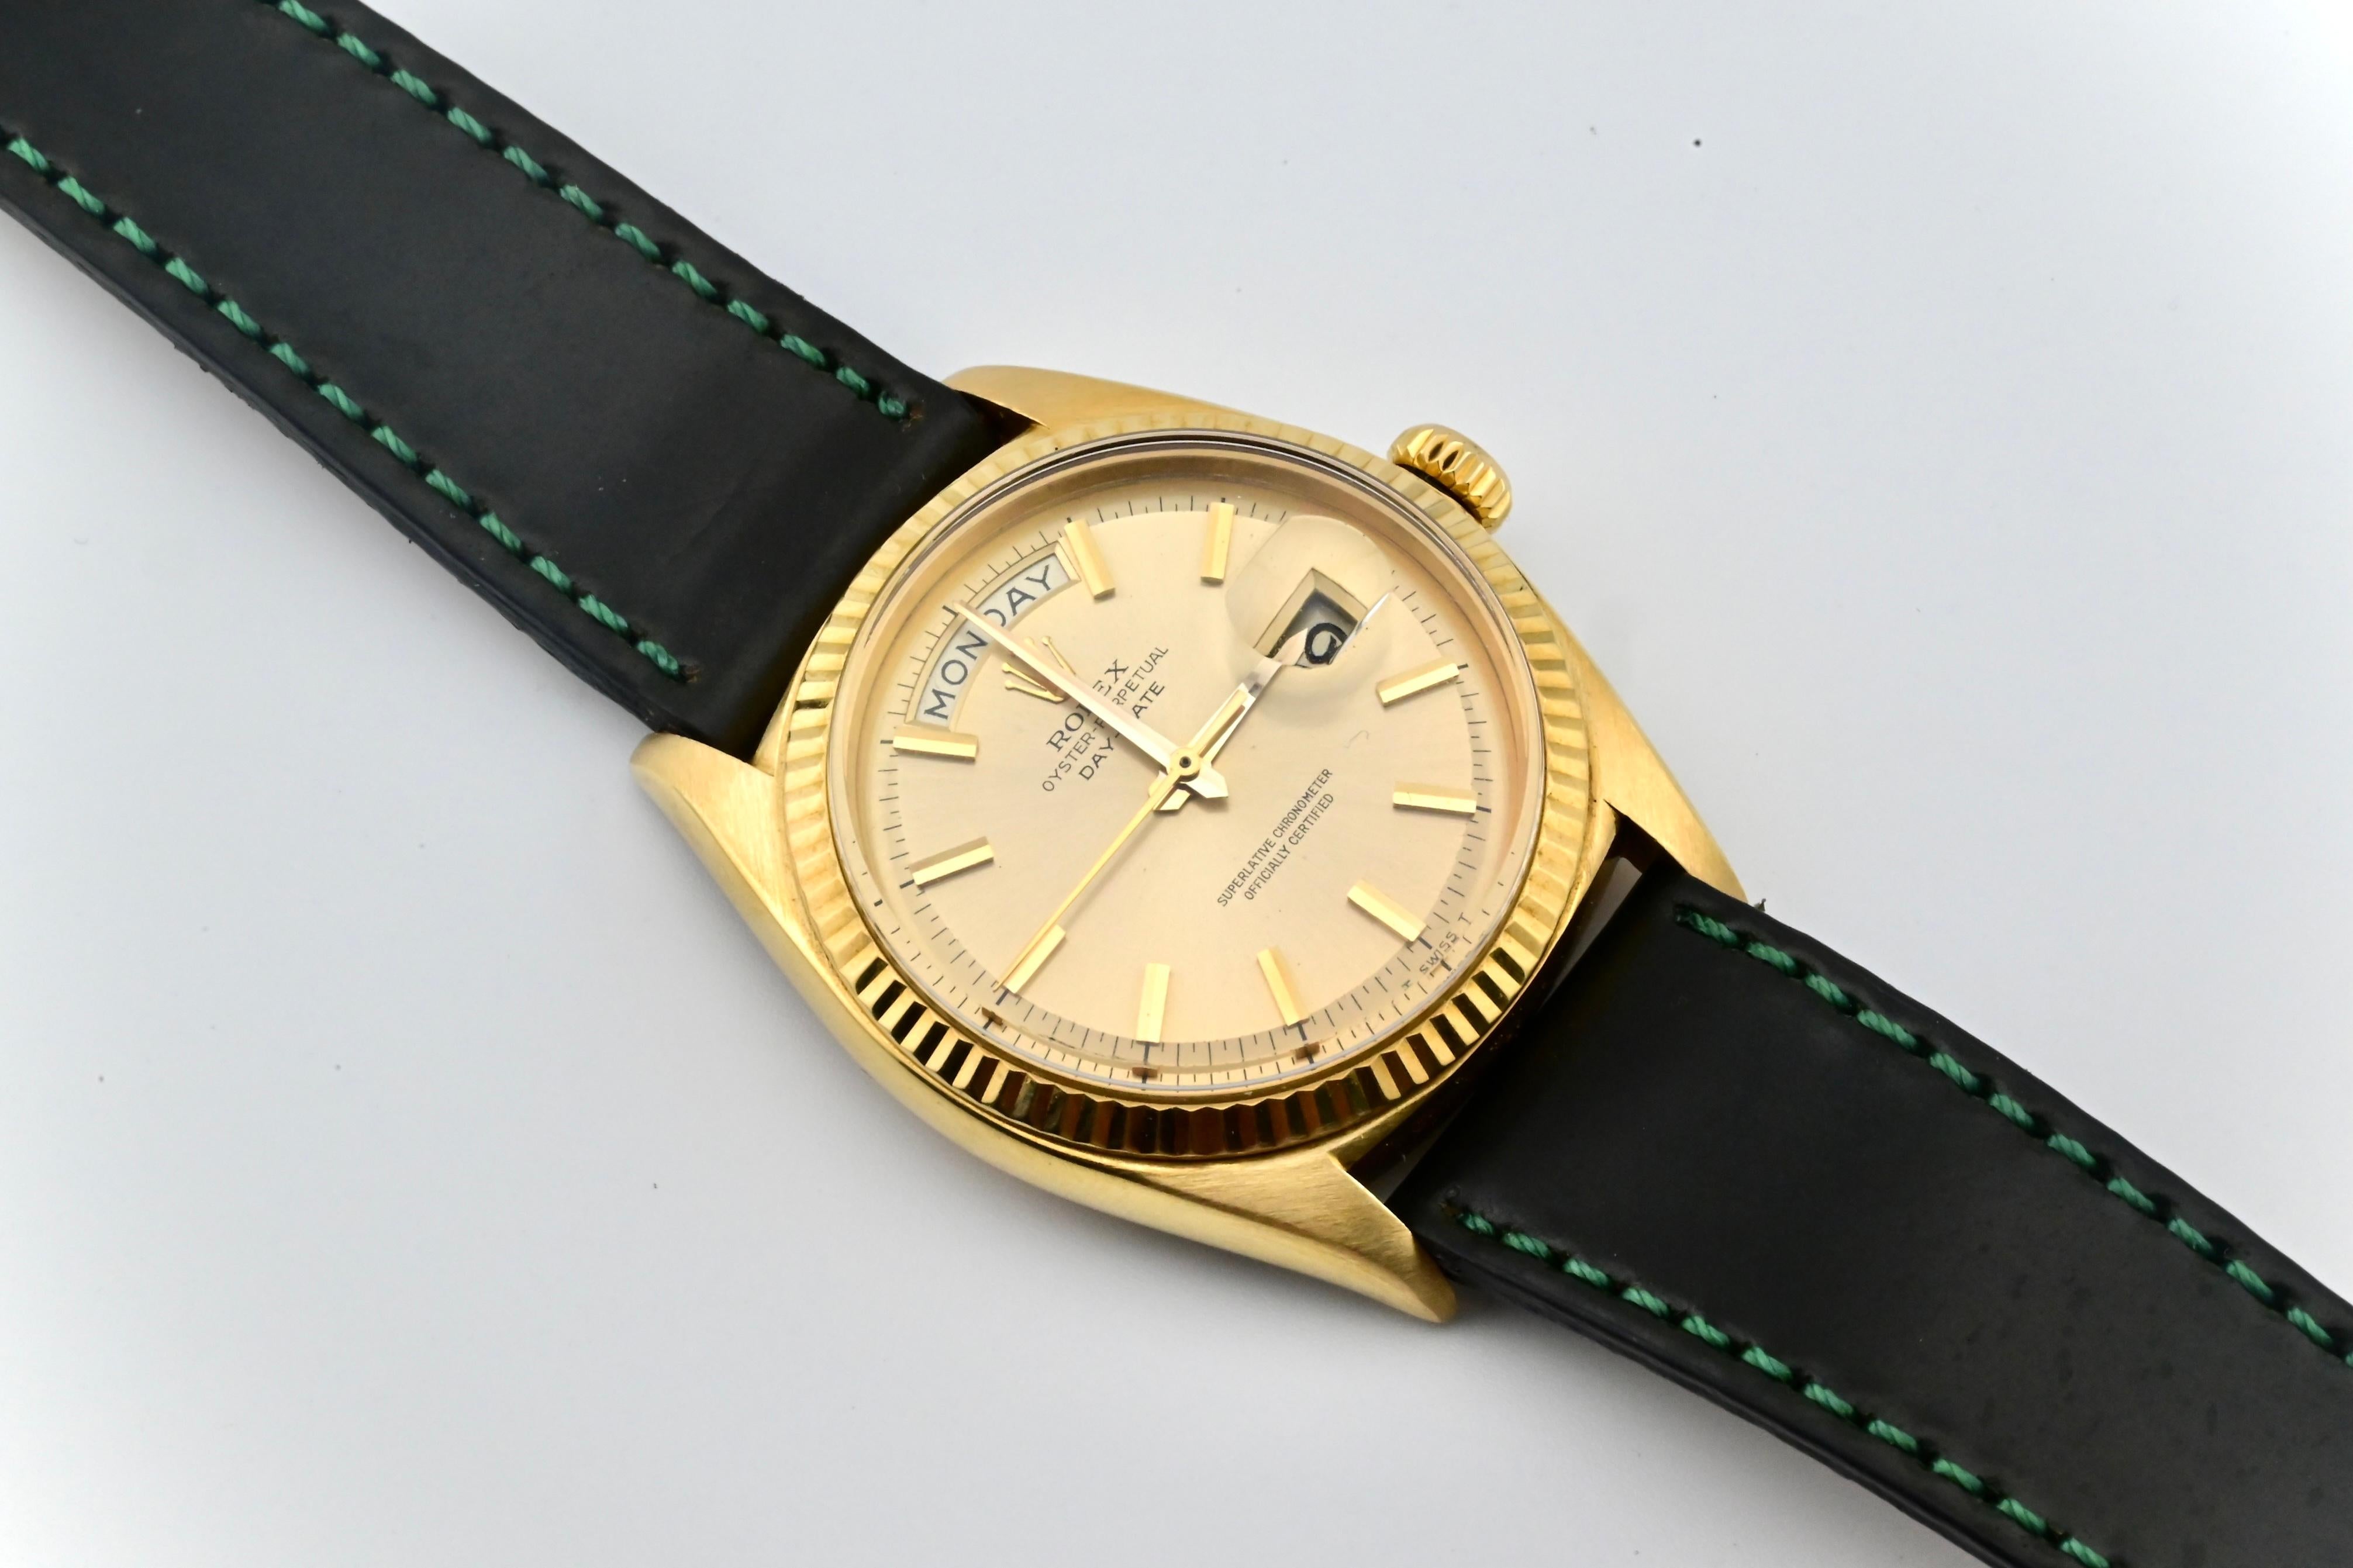 This is a rare and fabulous vintage 1965 18K yellow gold Rolex Day-Date 1803 with a double-hyphen dial. It comes with both the watch, and the strap. The strap length is 9 1/2 inches, and the watch weighs 65 grams. The case diameter is 36mm, the case